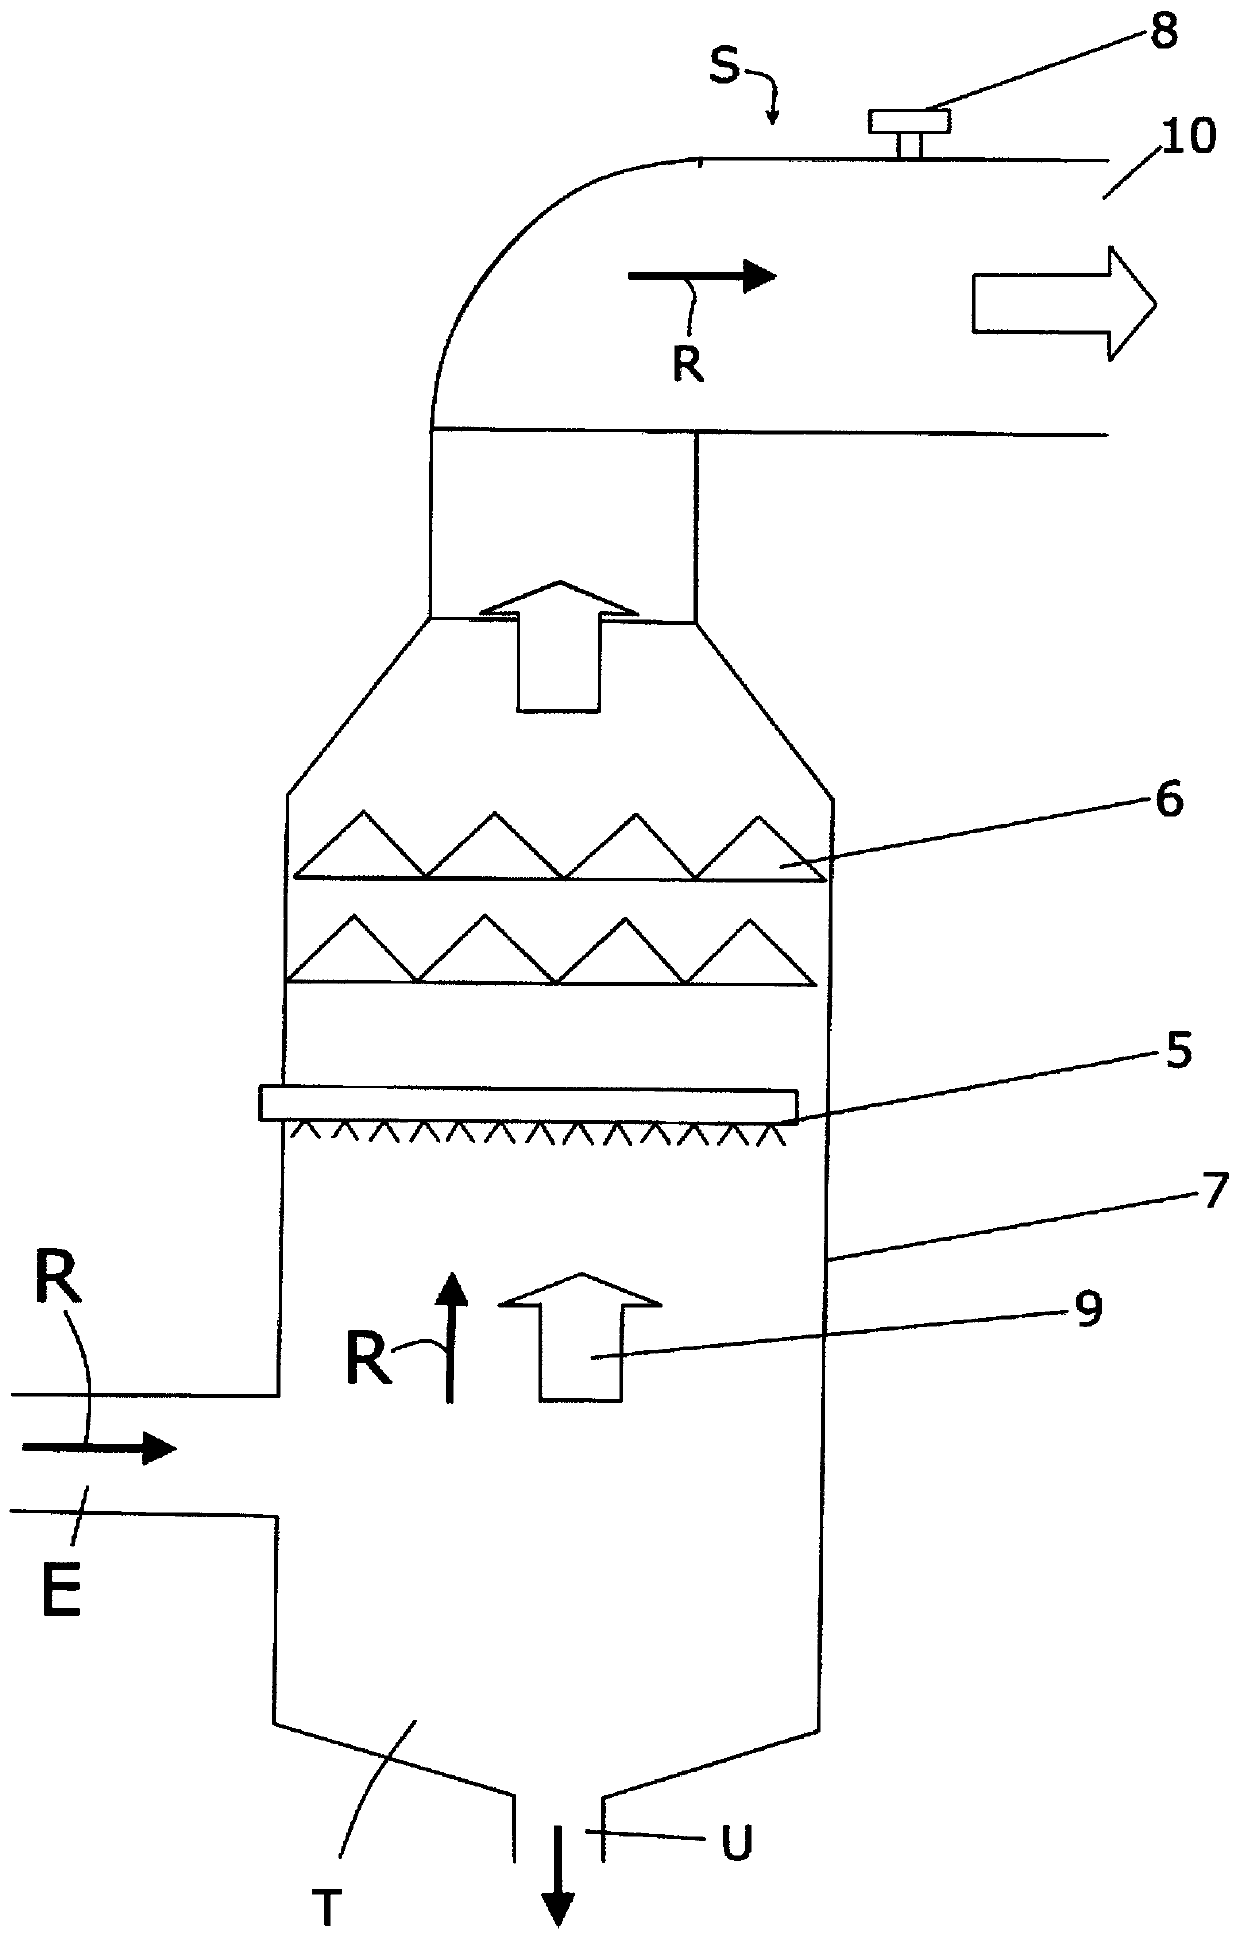 Separating system of a flue-gas desulfurization system of a ship